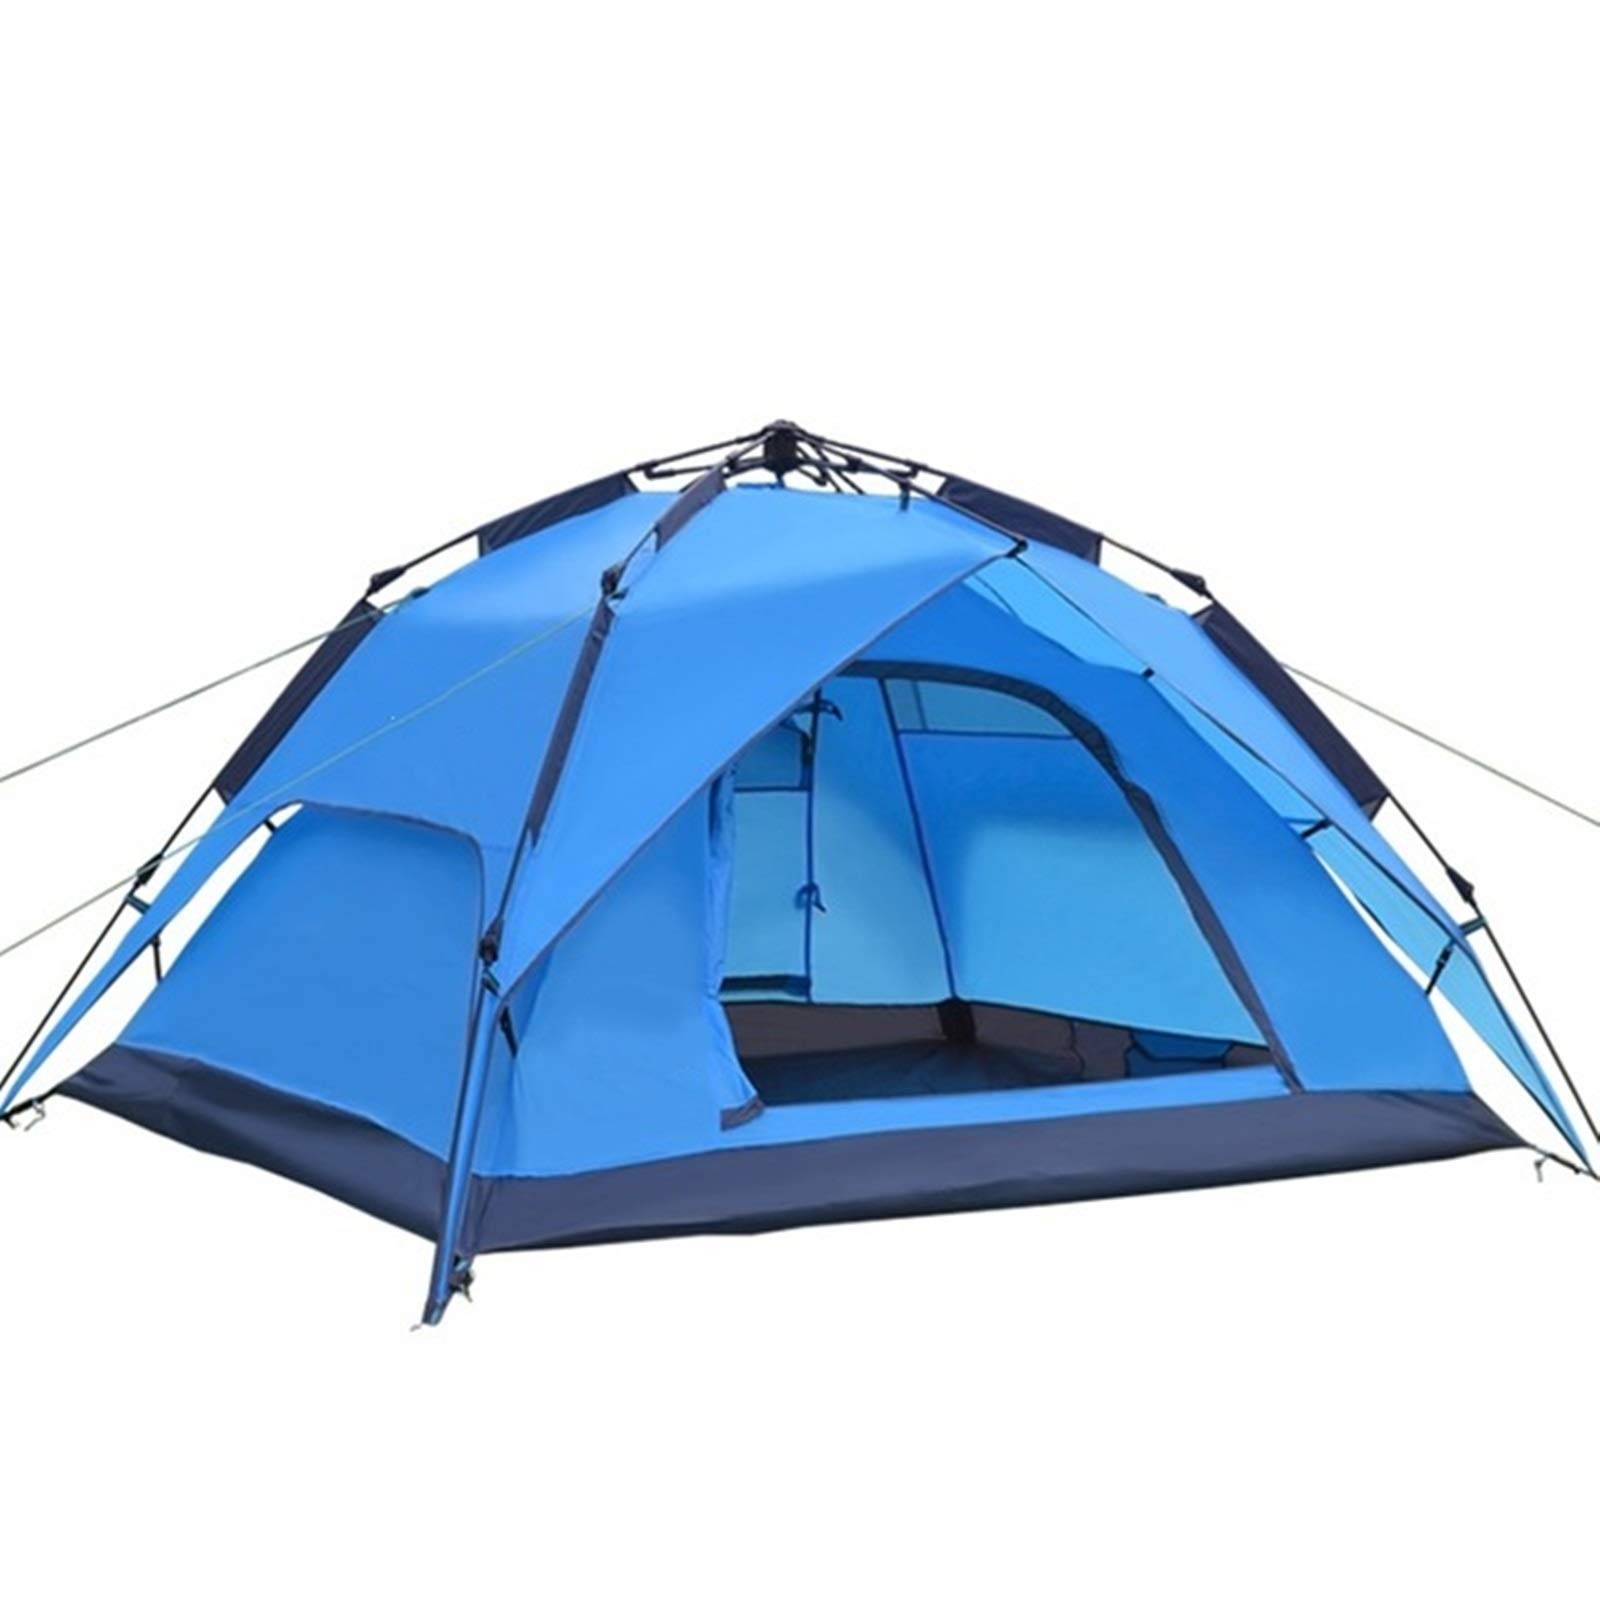 Carrying Comfort: How Much Should a 3-Person Backpacking Tent Weigh?